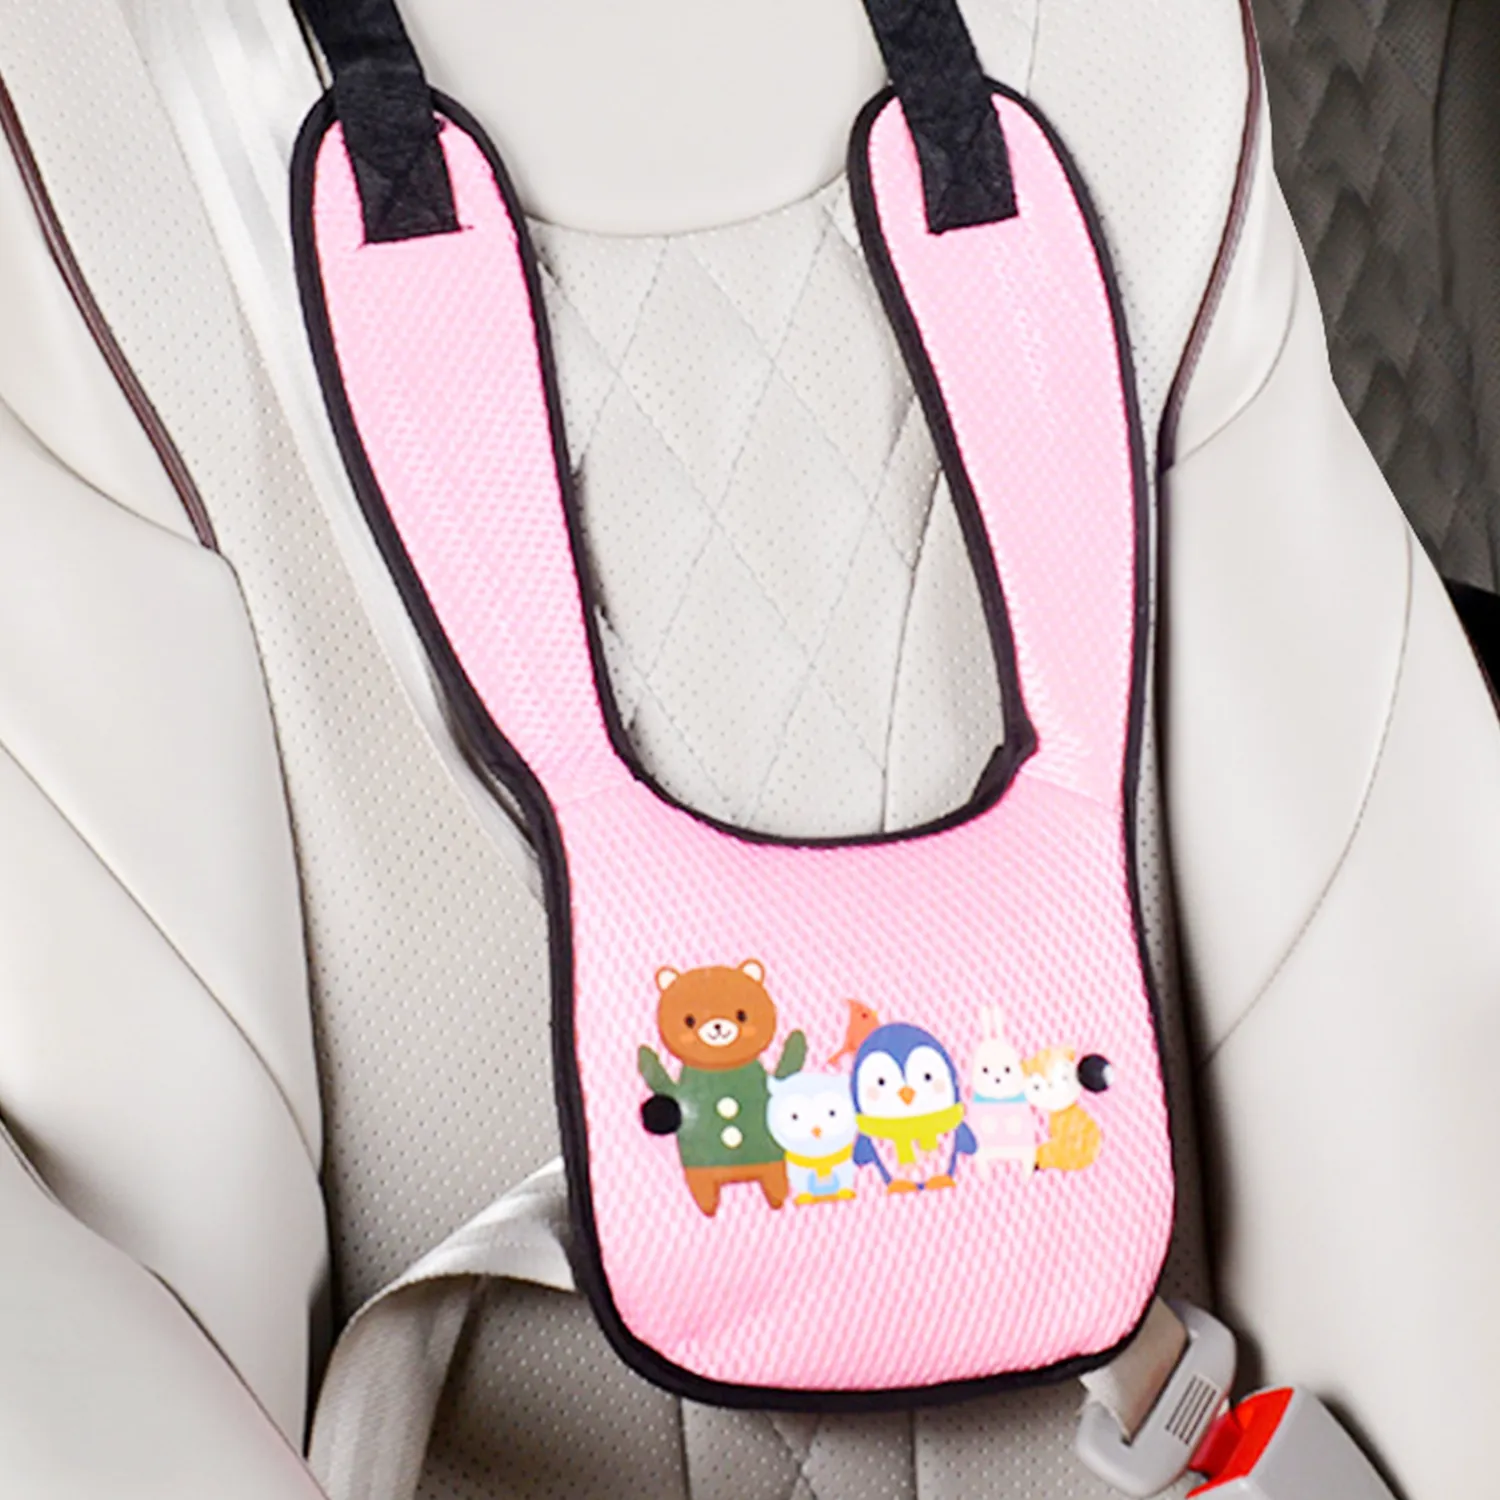 

Child Safety Belt Adjuster - Convenient and Protective Car Seat Accessory for Children